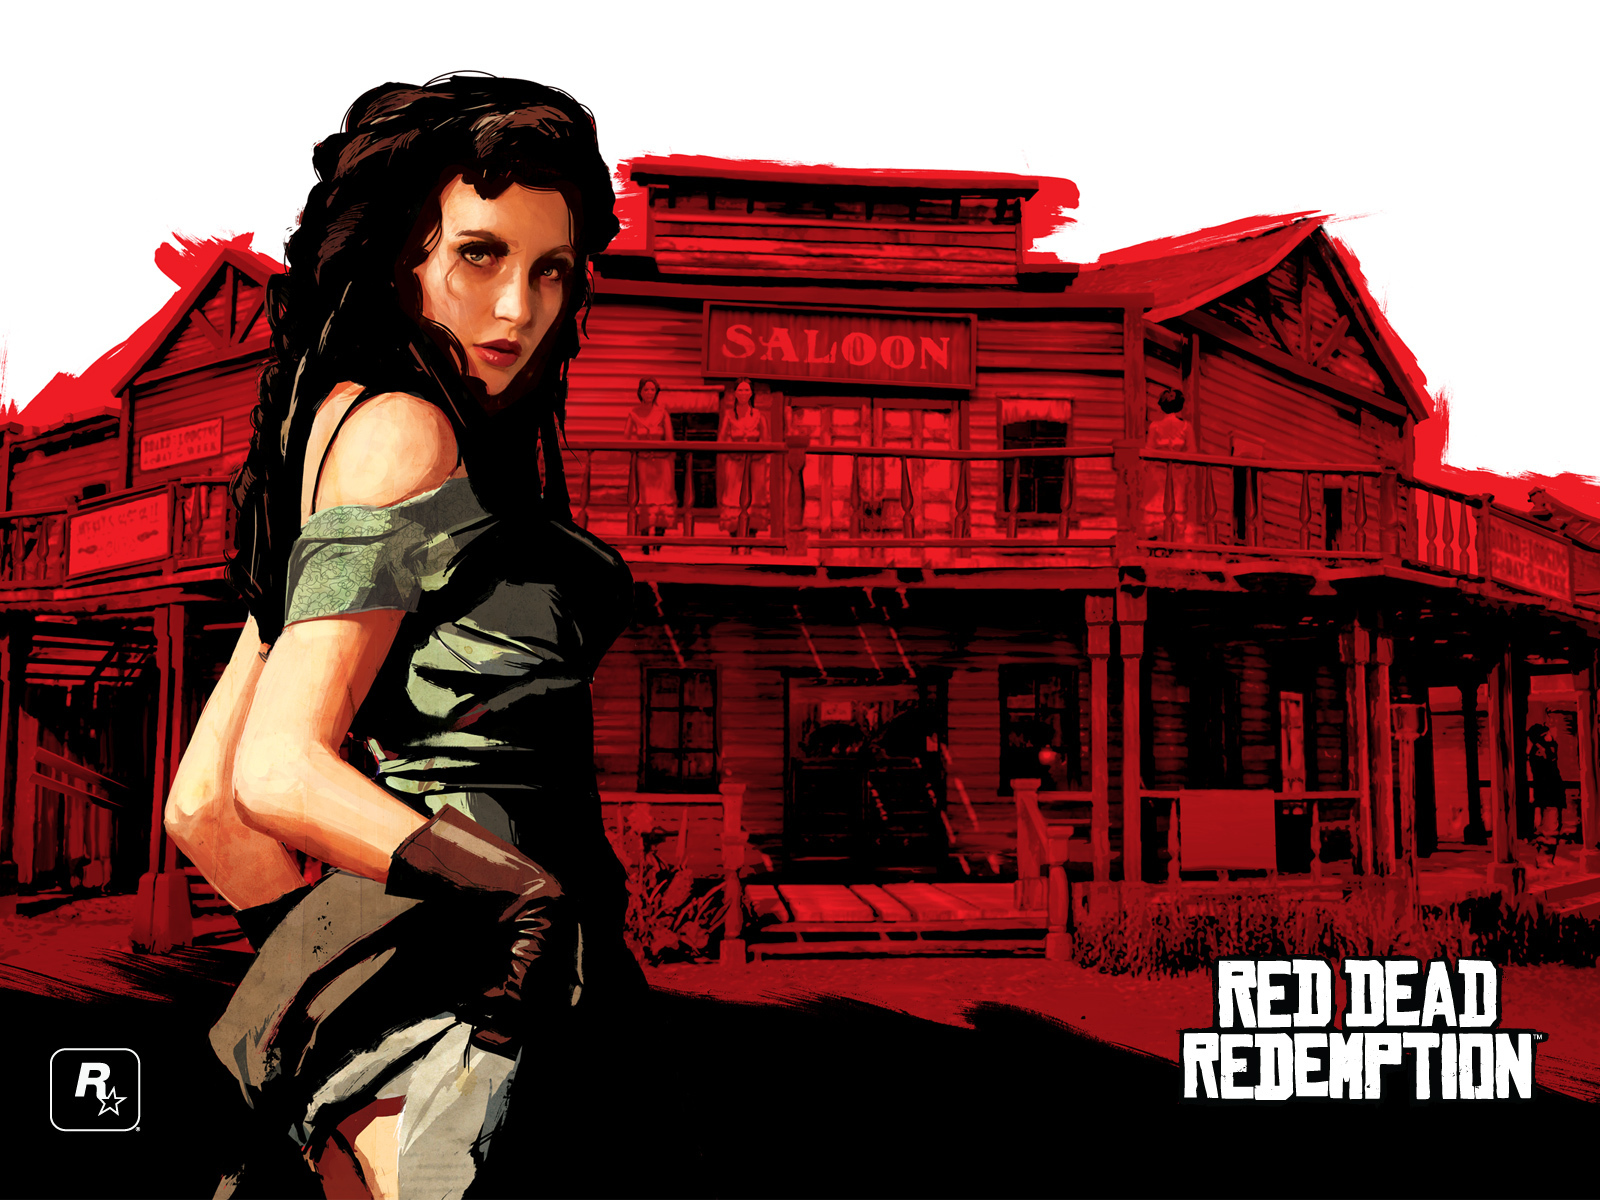 red dead redemption wallpaper,pc game,games,black hair,adventure game,action adventure game